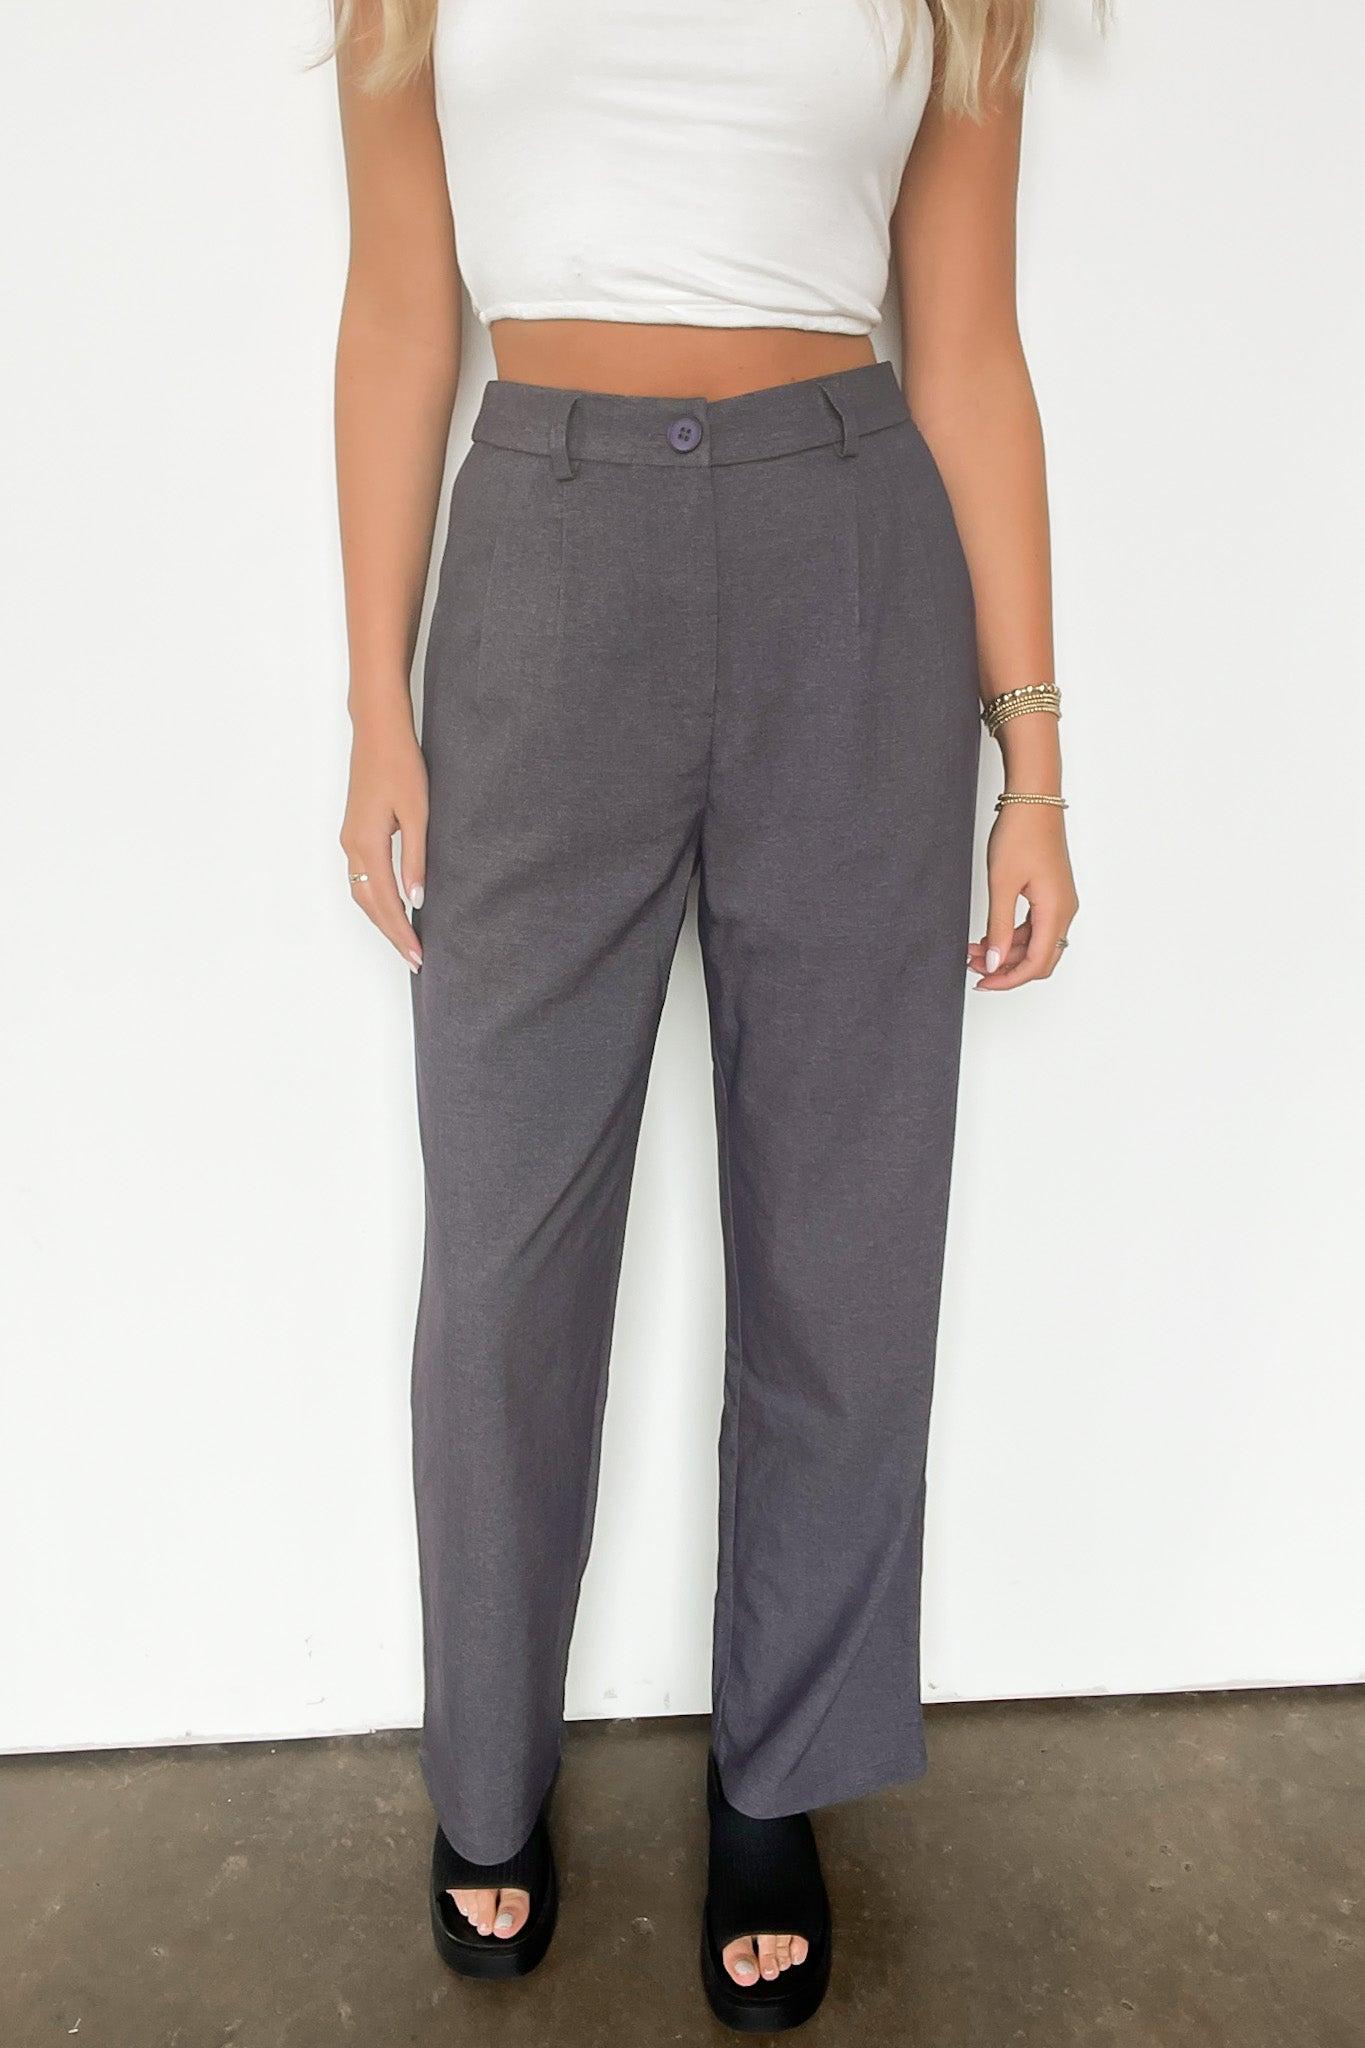  Trendsetting Poise High Rise Pleated Pants - Madison and Mallory